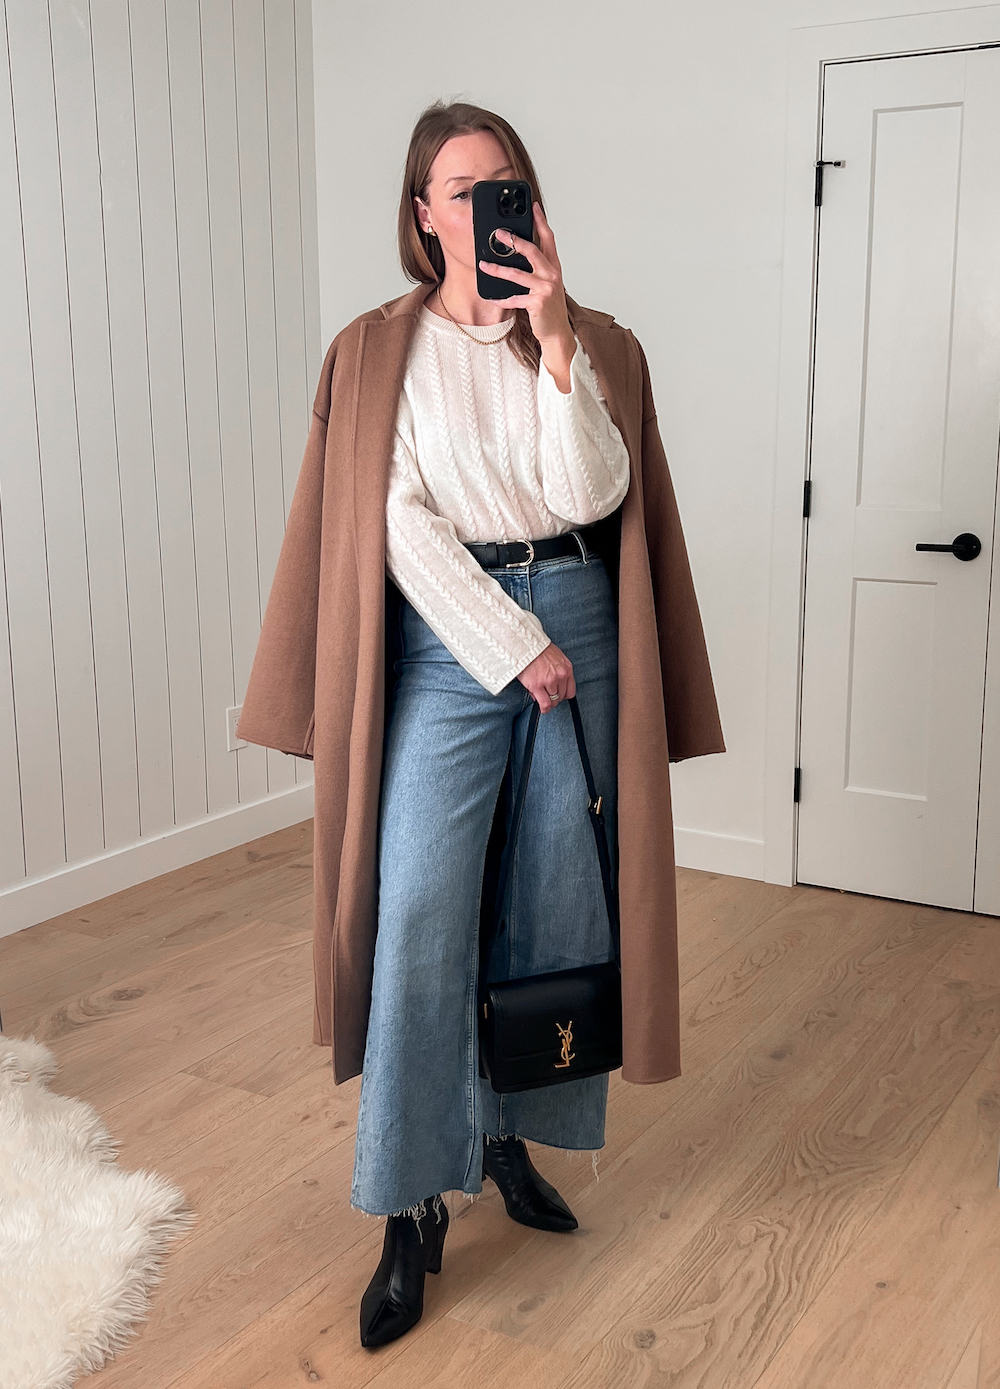 Christal wearing a long denim skirt with a white sweater, black booties and a camel colored coat.